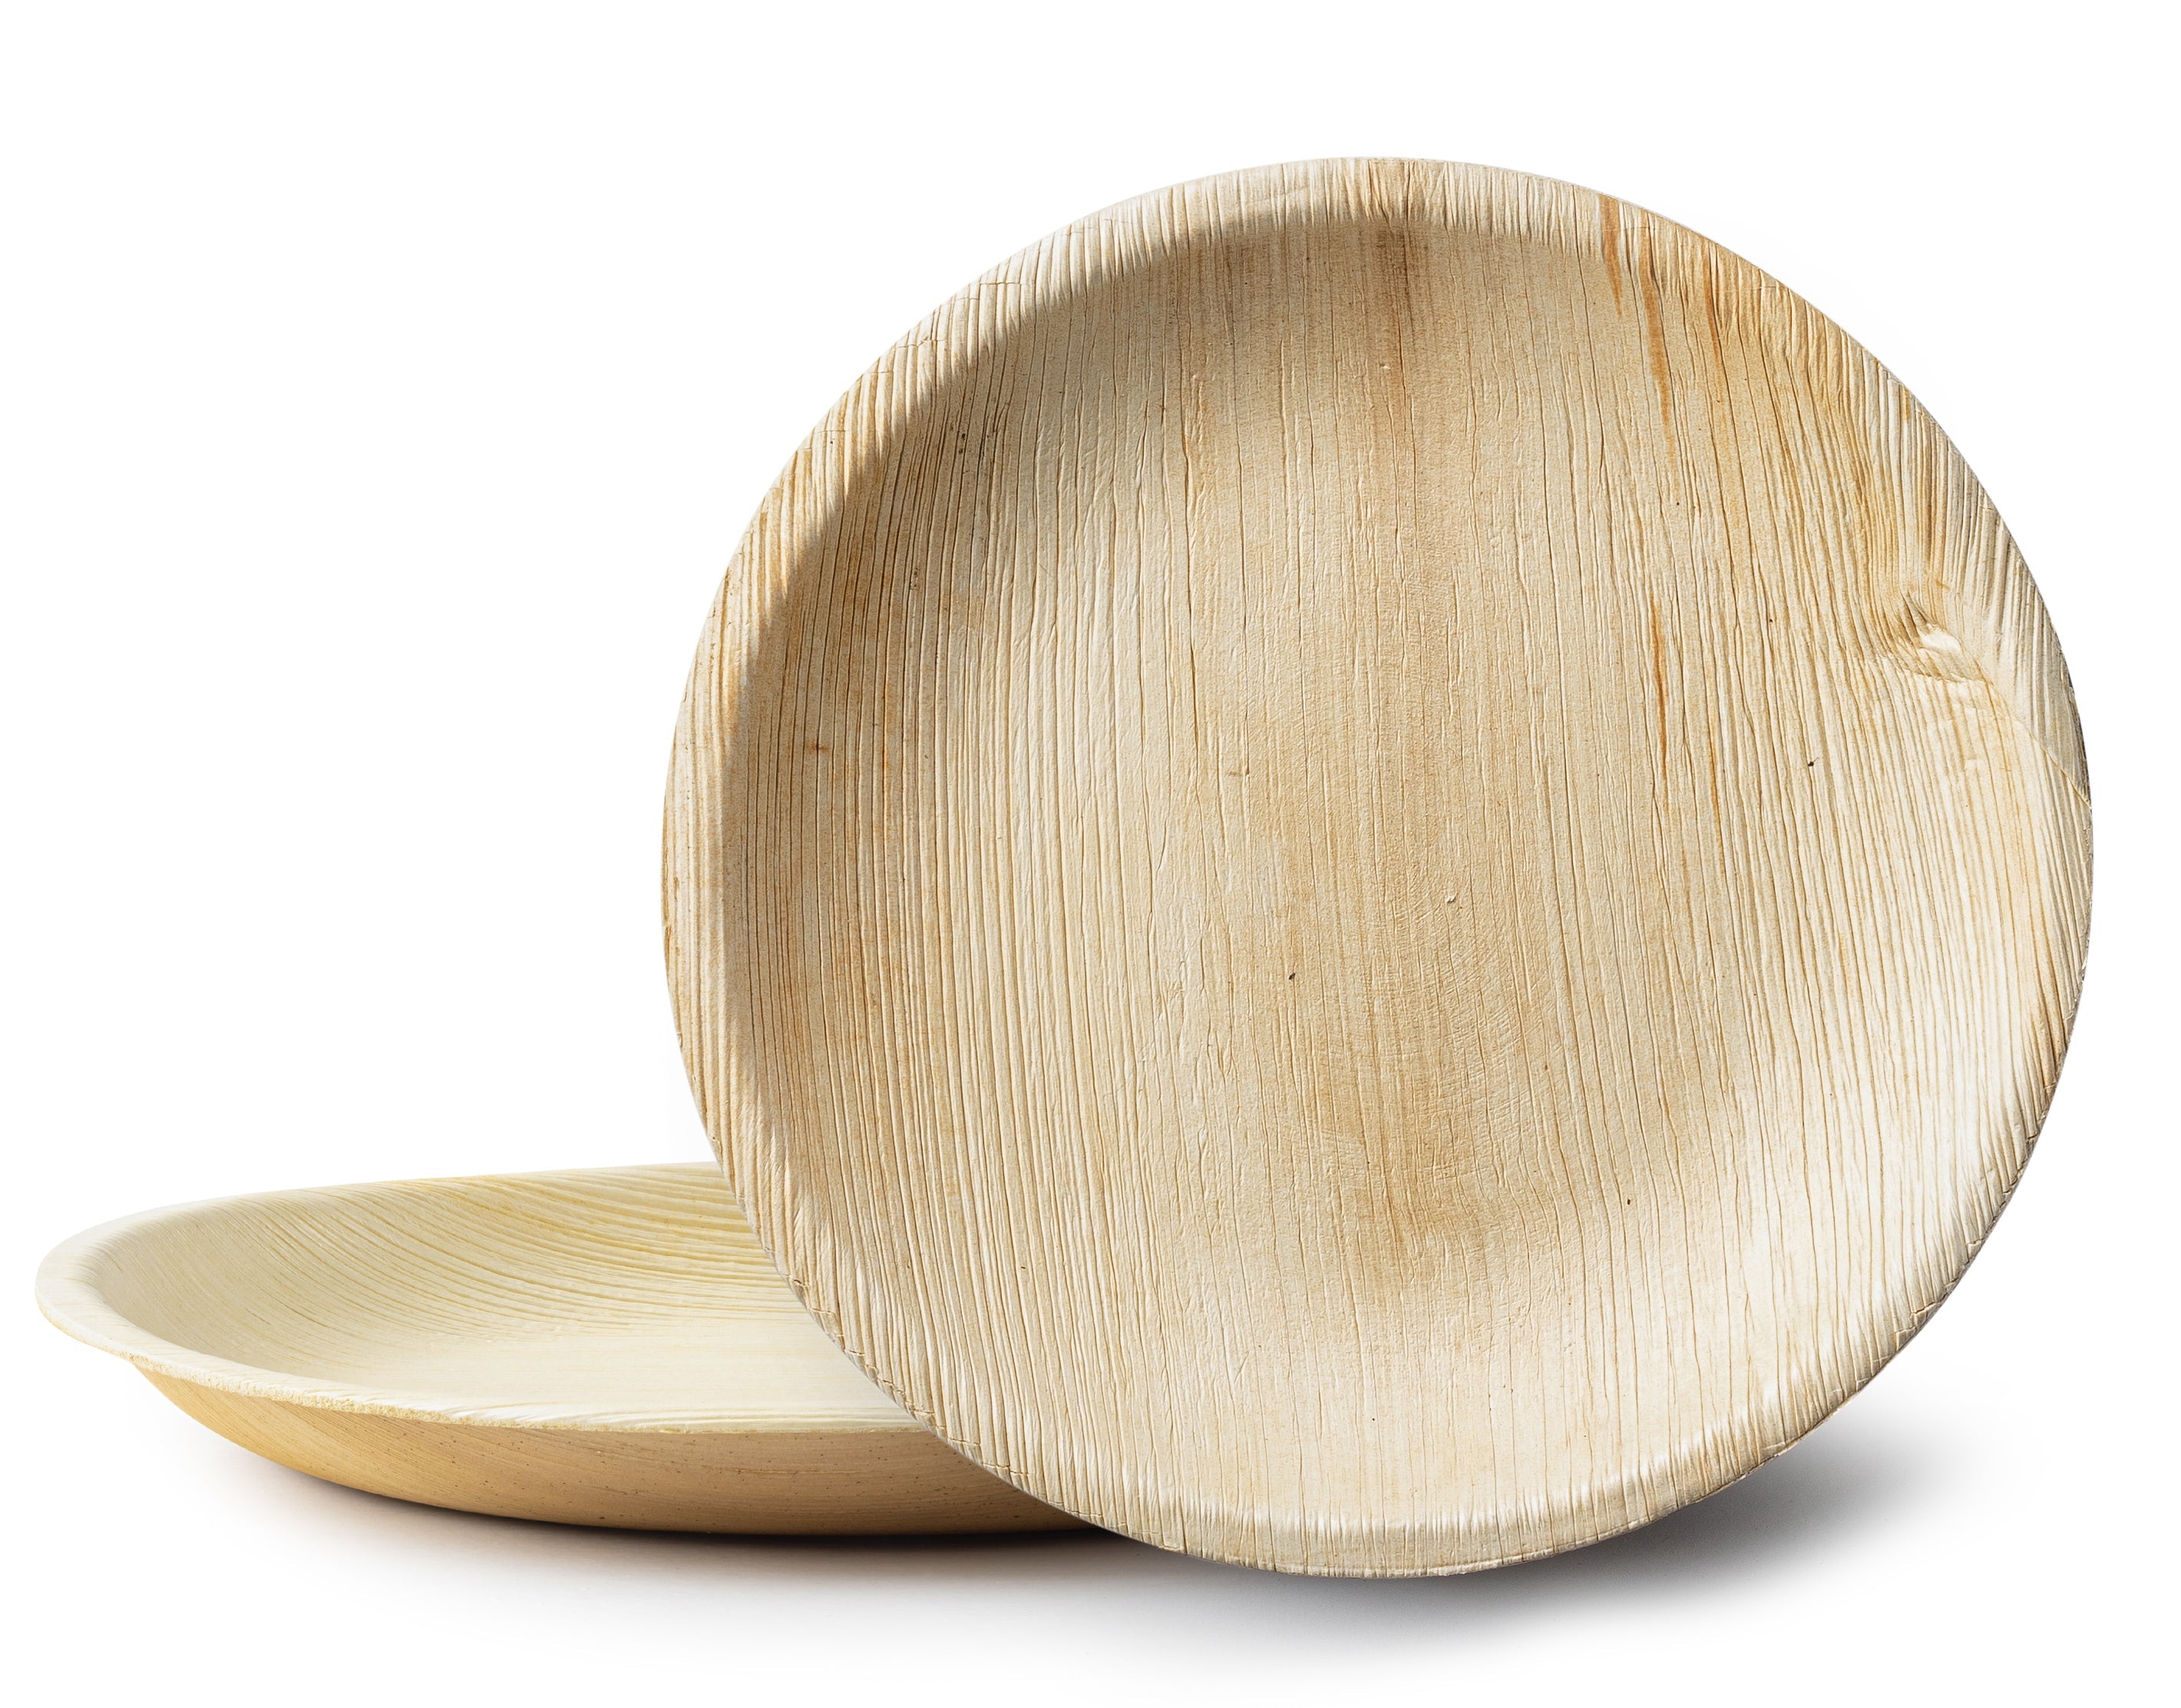 Palm Leaf Plate, High Quality Disposable Plates